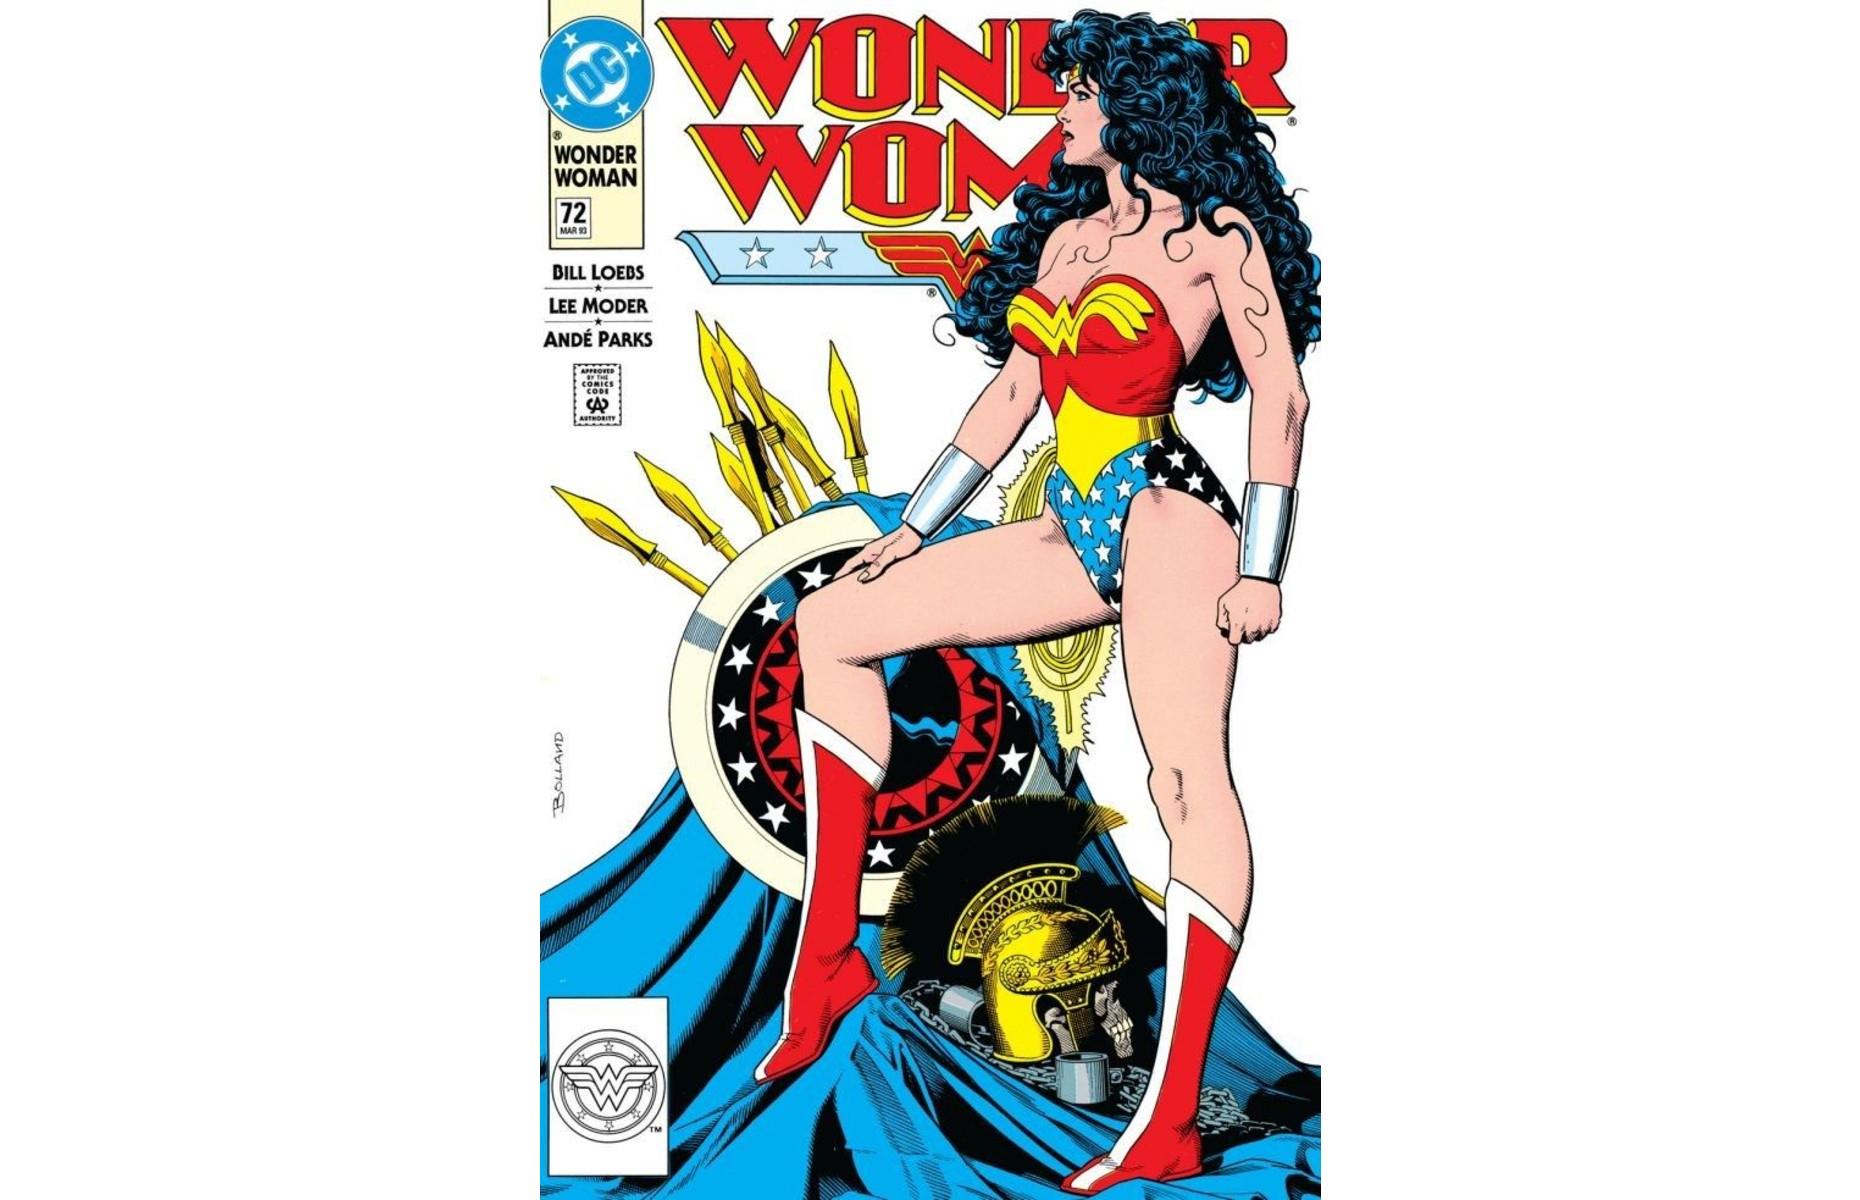 Wonder Woman #72: up to £305 (£400)